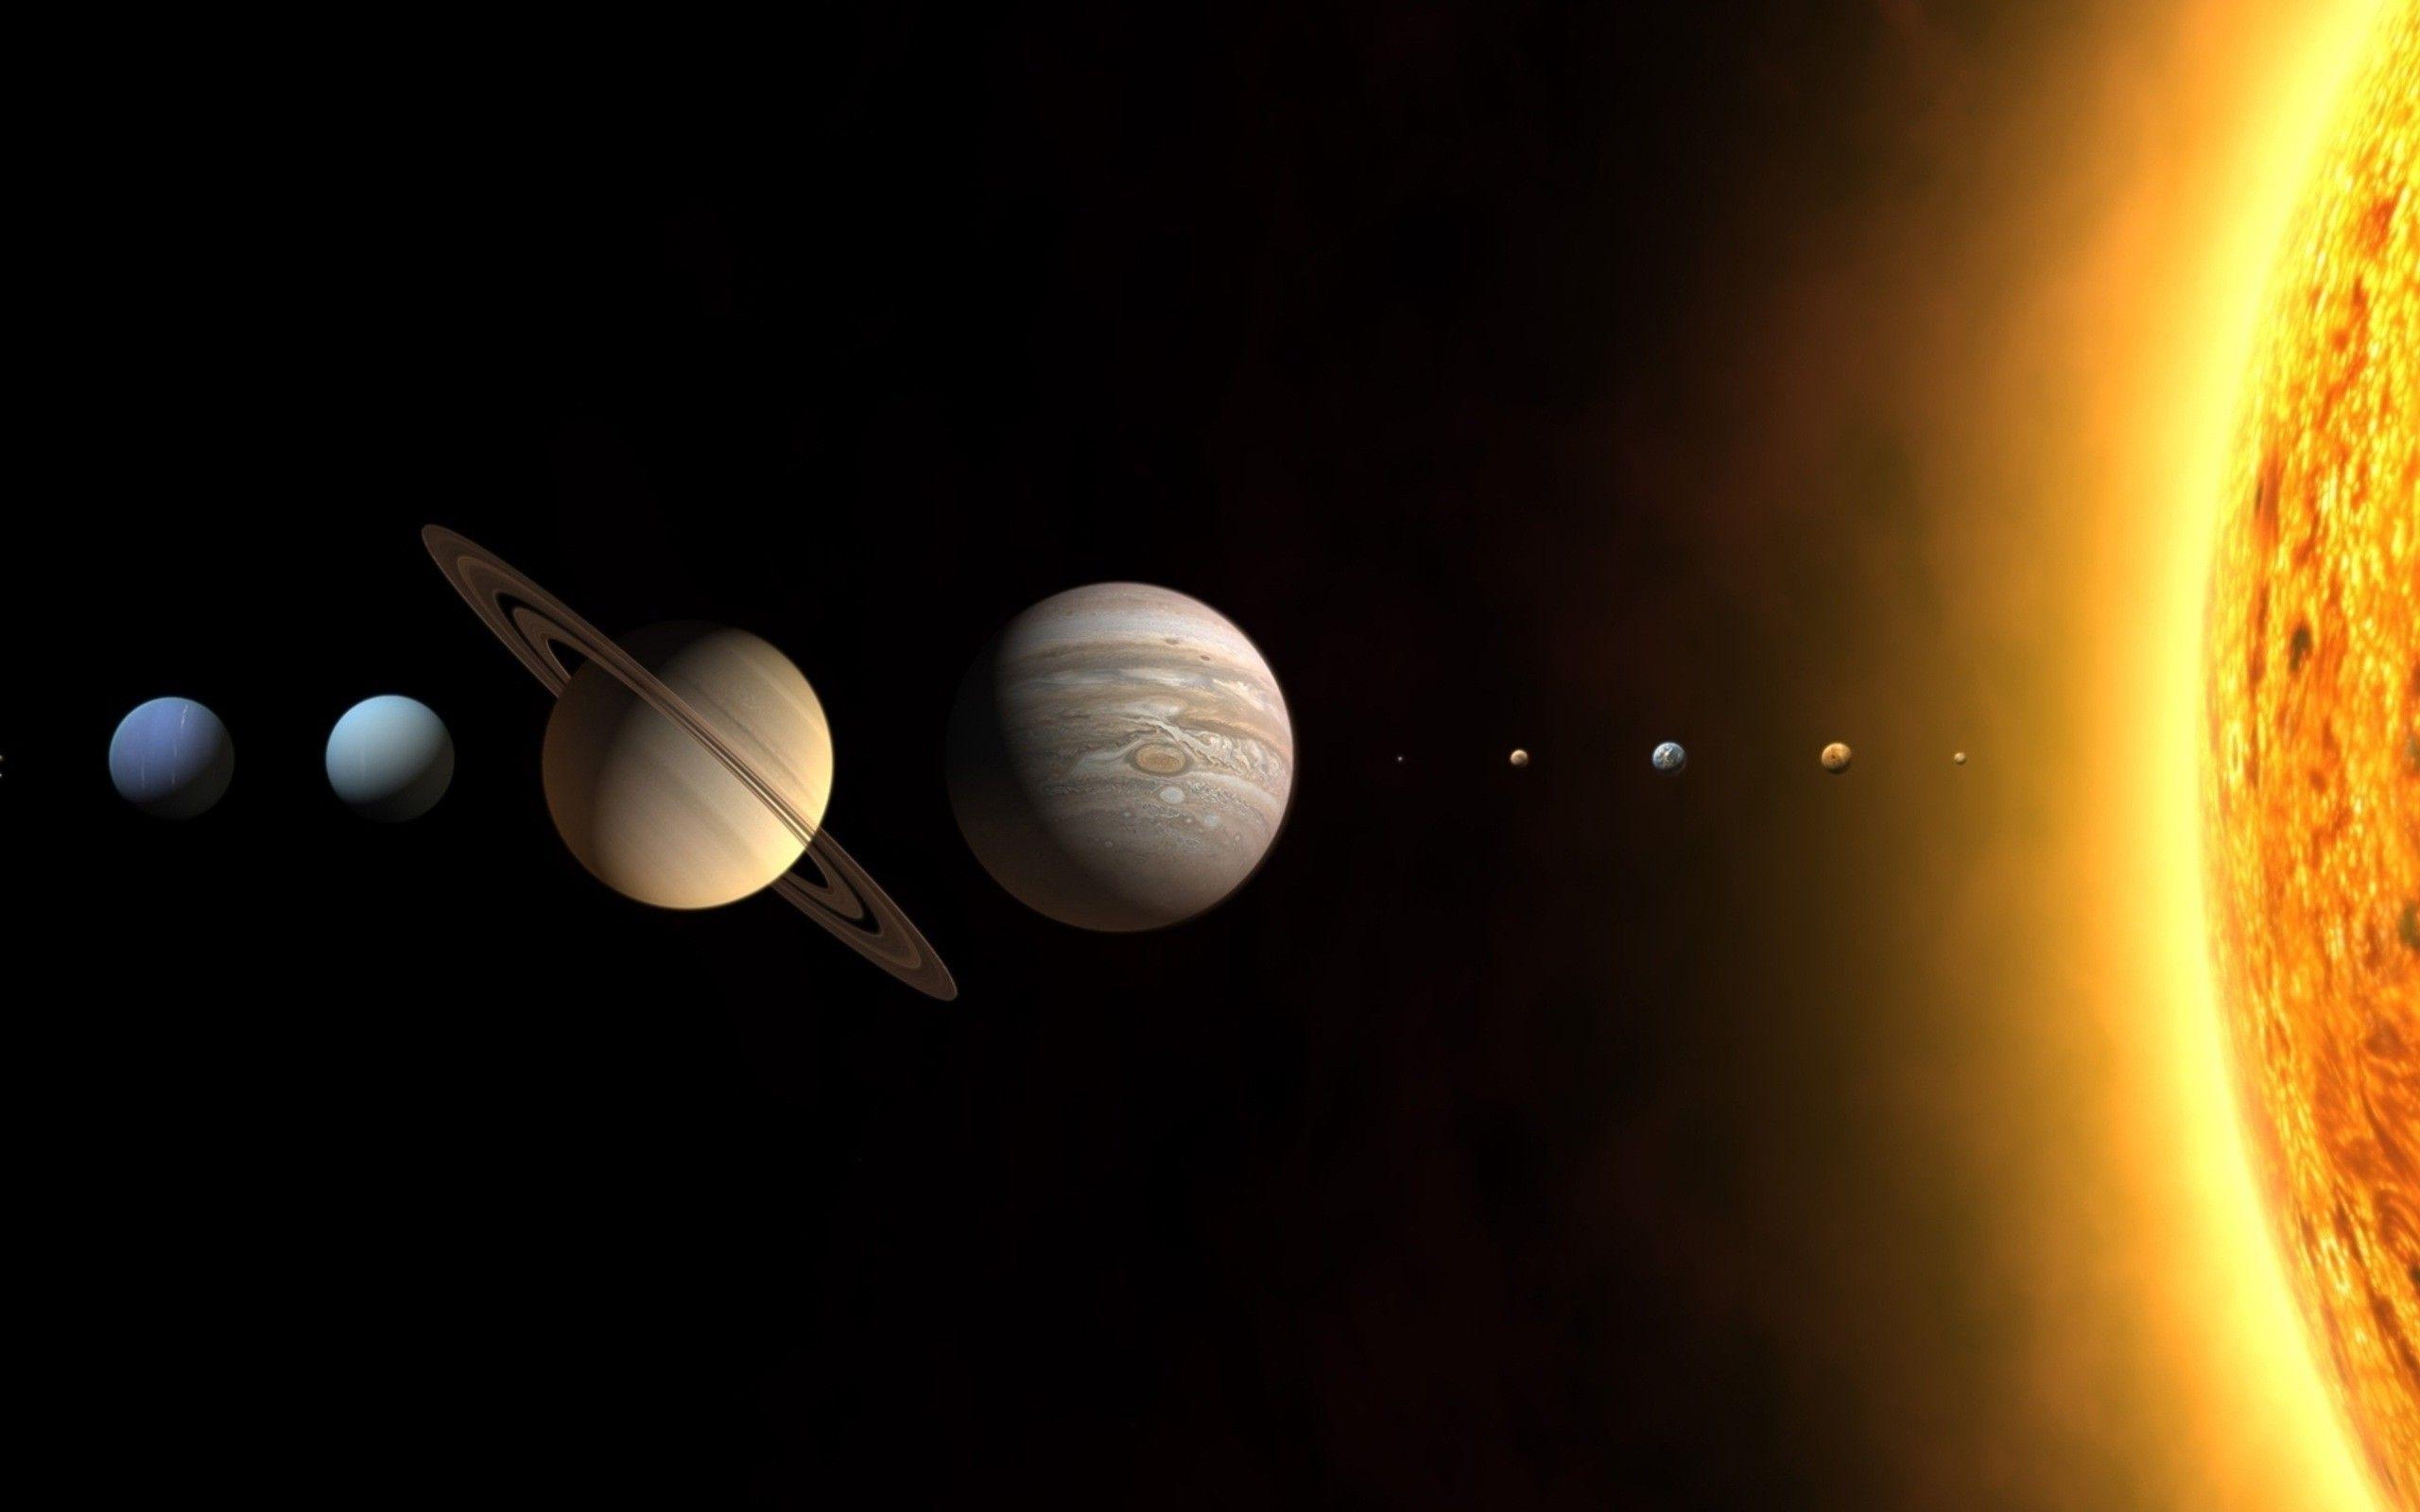 Solar System Hd Wallpapers Top Free Solar System Hd Backgrounds Wallpaperaccess 9655